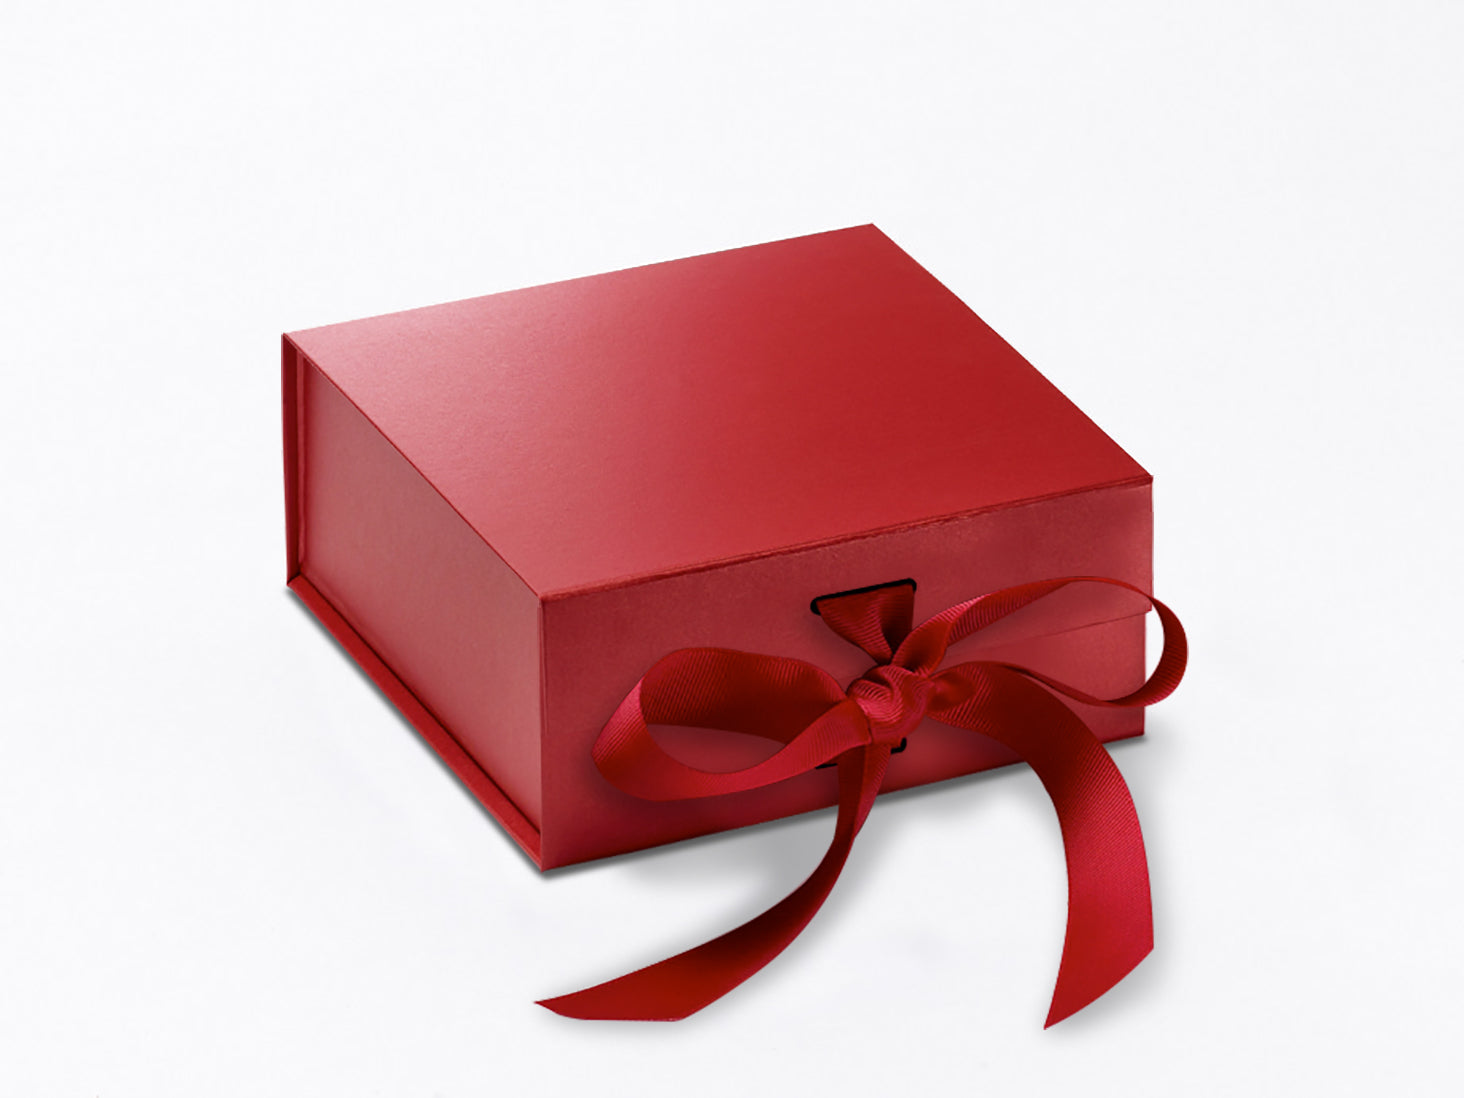 Sample Red Large Gift Box with changeable ribbon